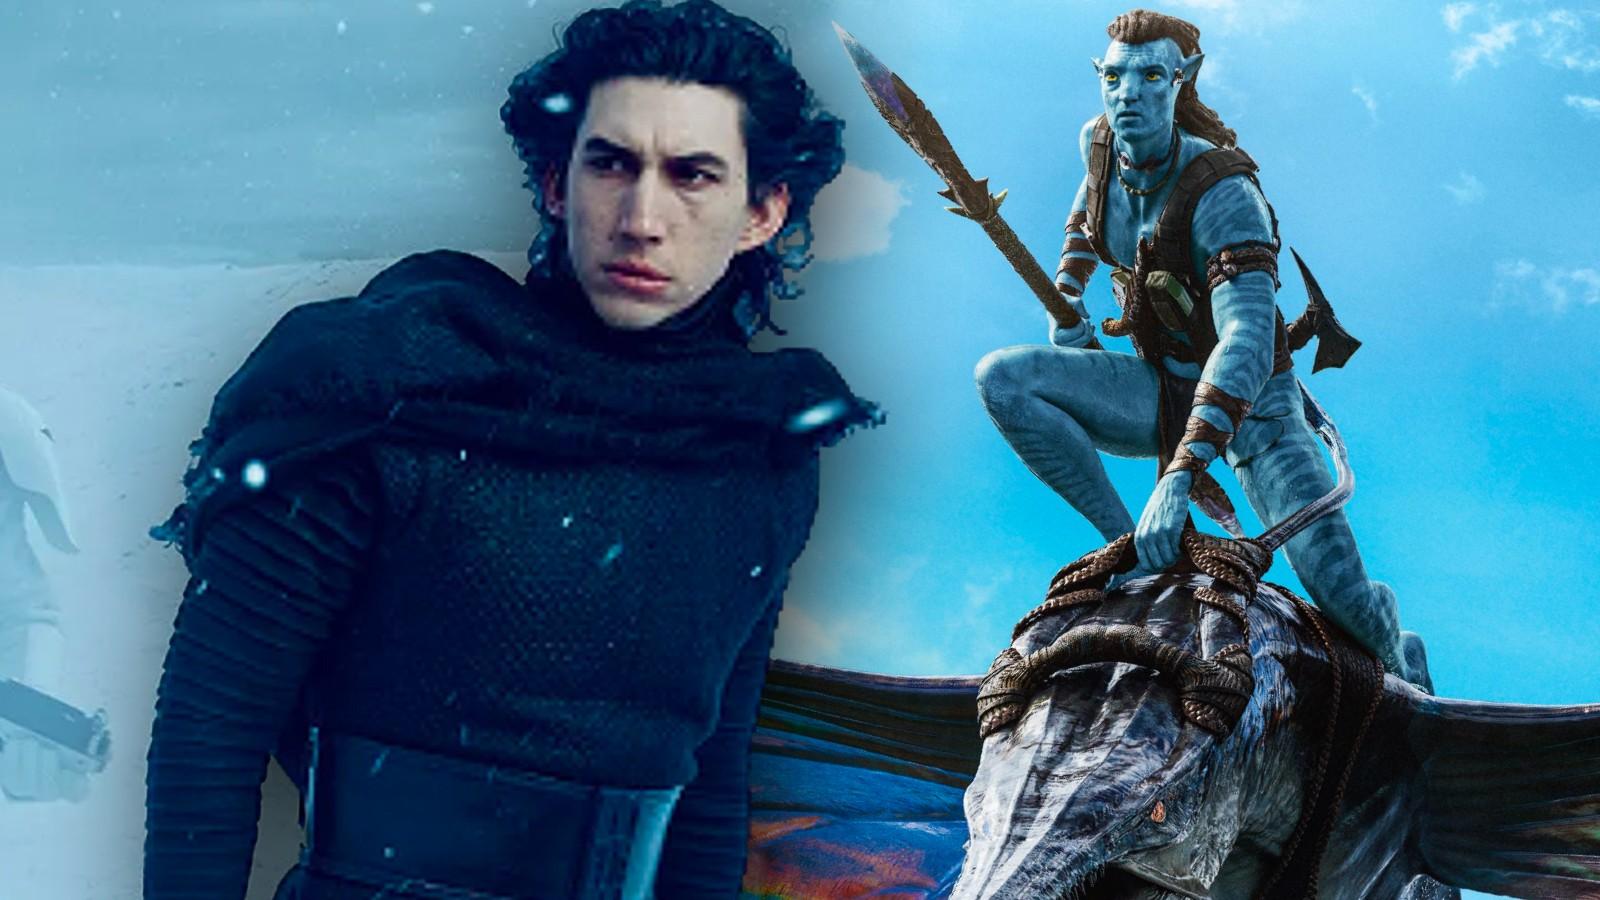 Kylo Ren in Star Wars: The Force Awakens and a poster for Avatar: The Way of Water, two of the most expensive movies ever made